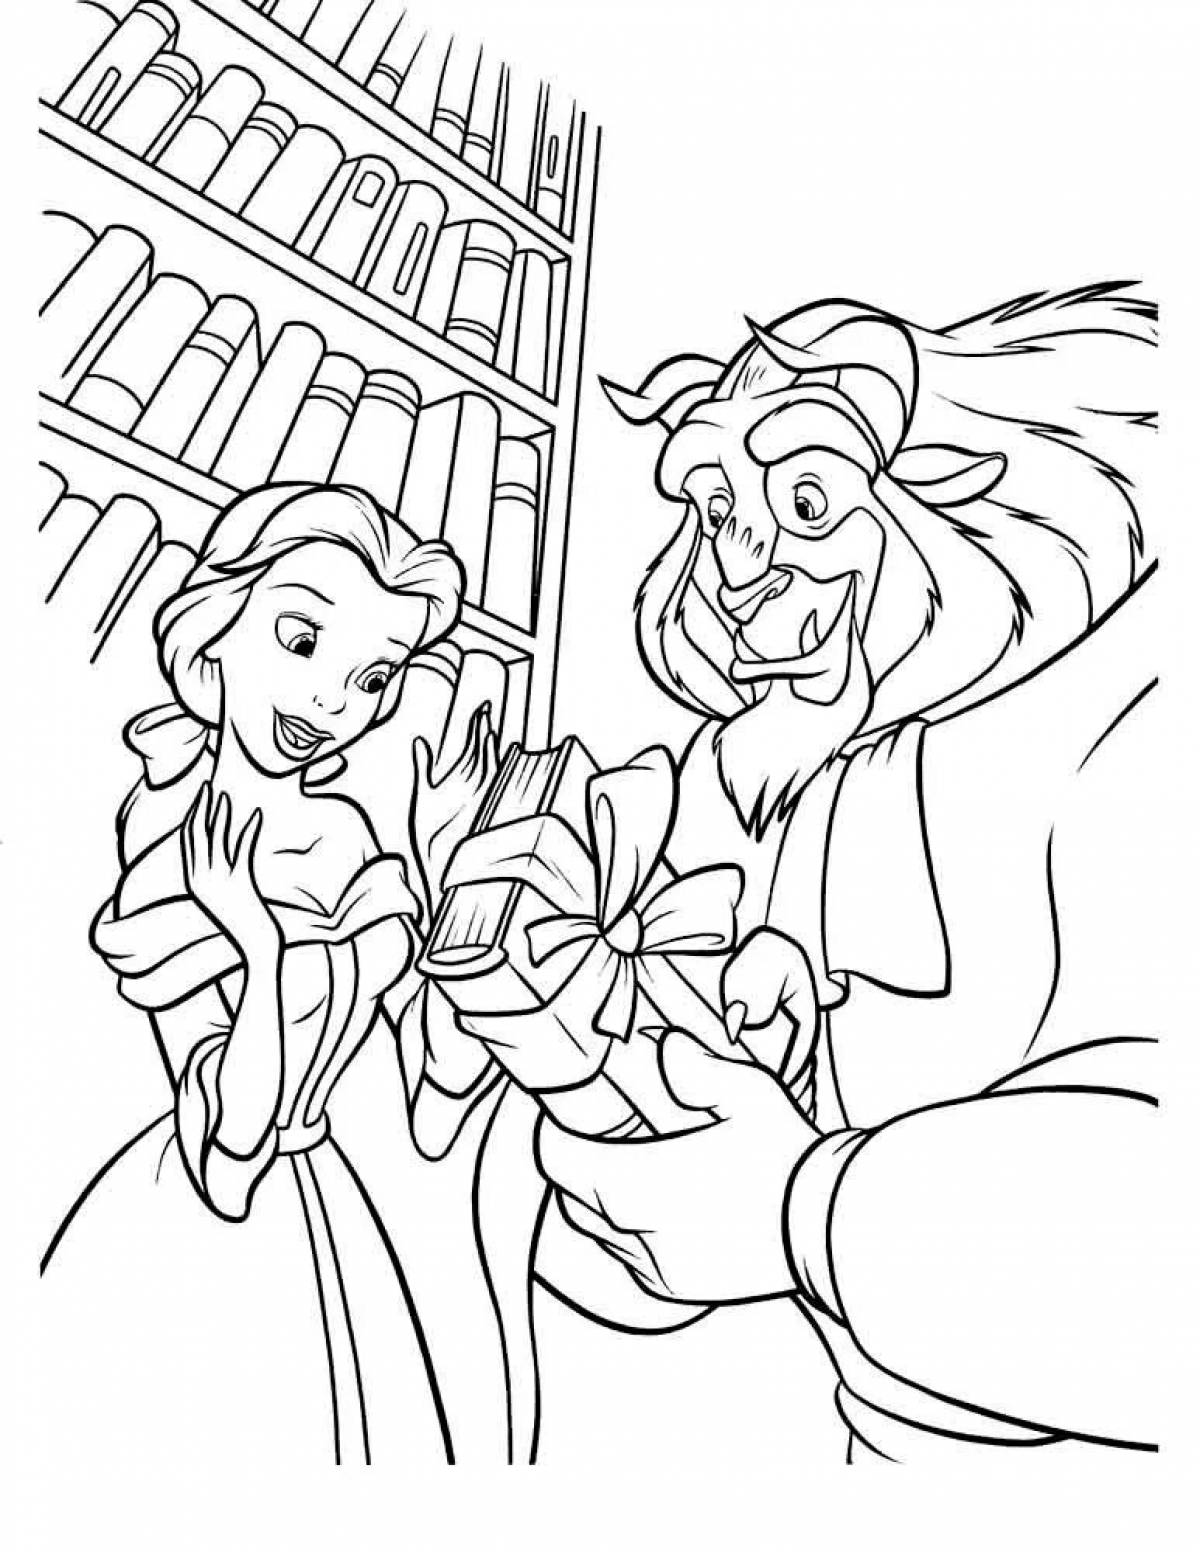 Beauty and the beast for kids #5